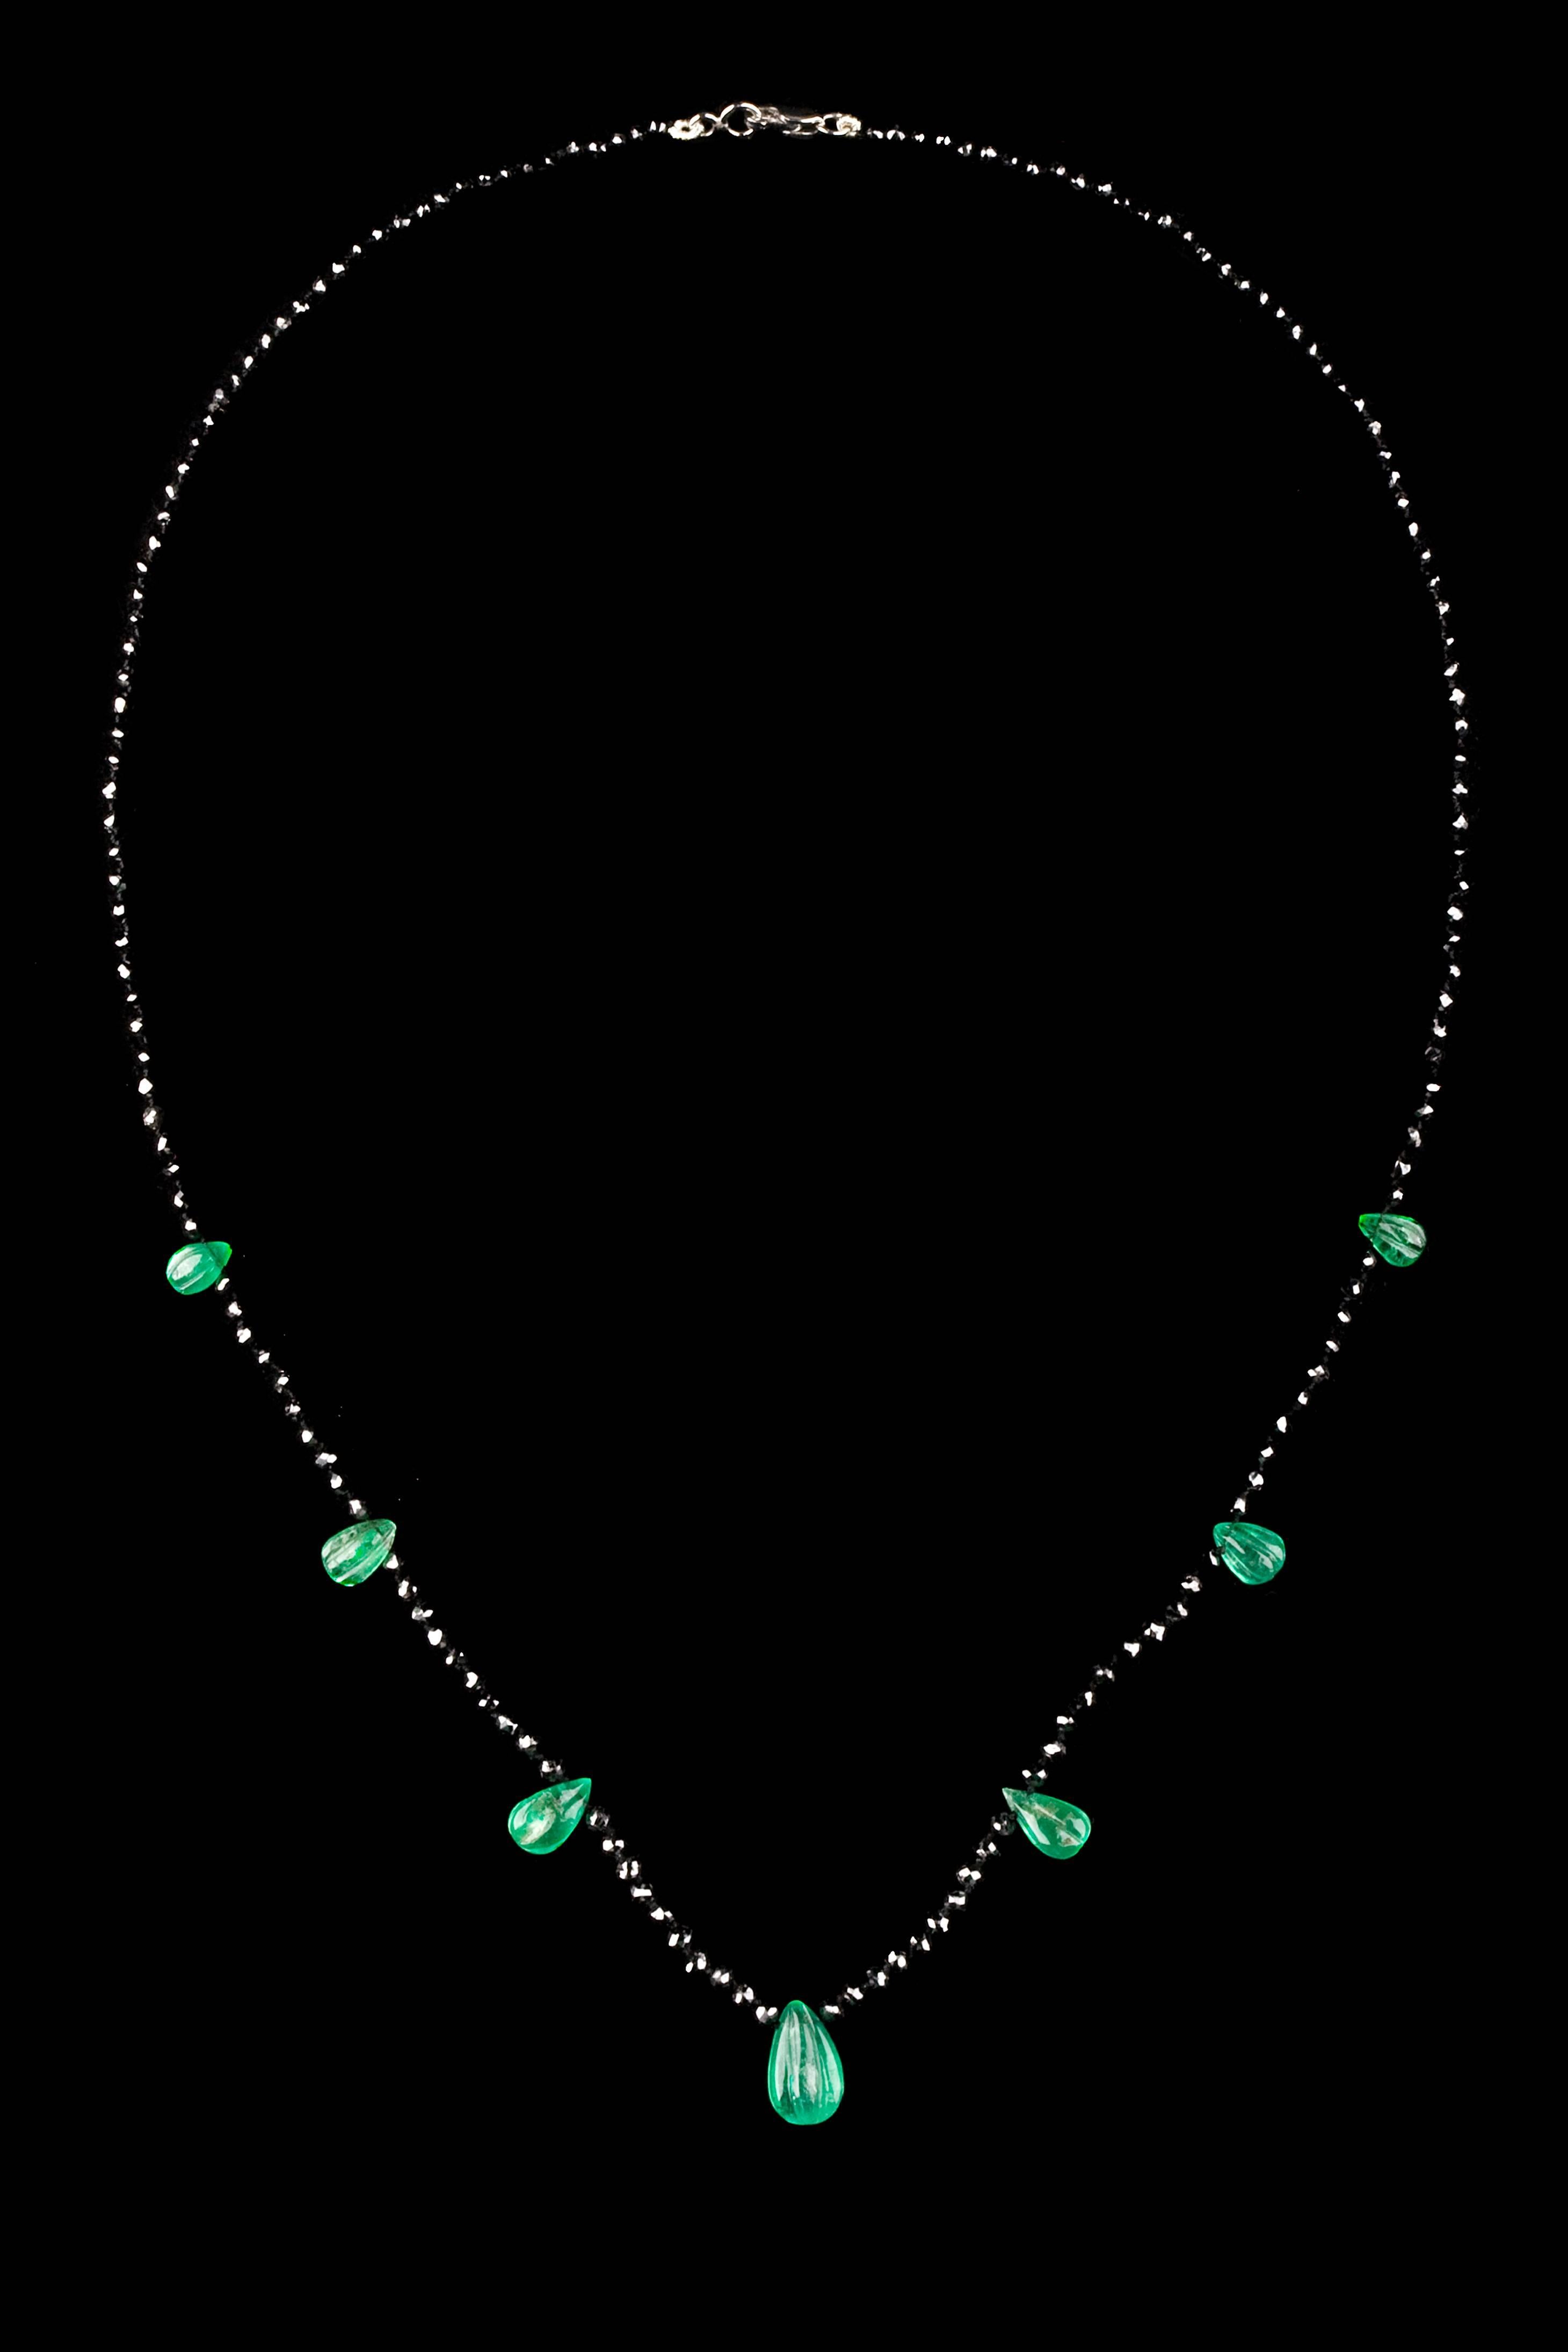 Contemporary design graduated 21.5 carat black diamond necklace and 7 gadrooned pear shaped emeralds.

